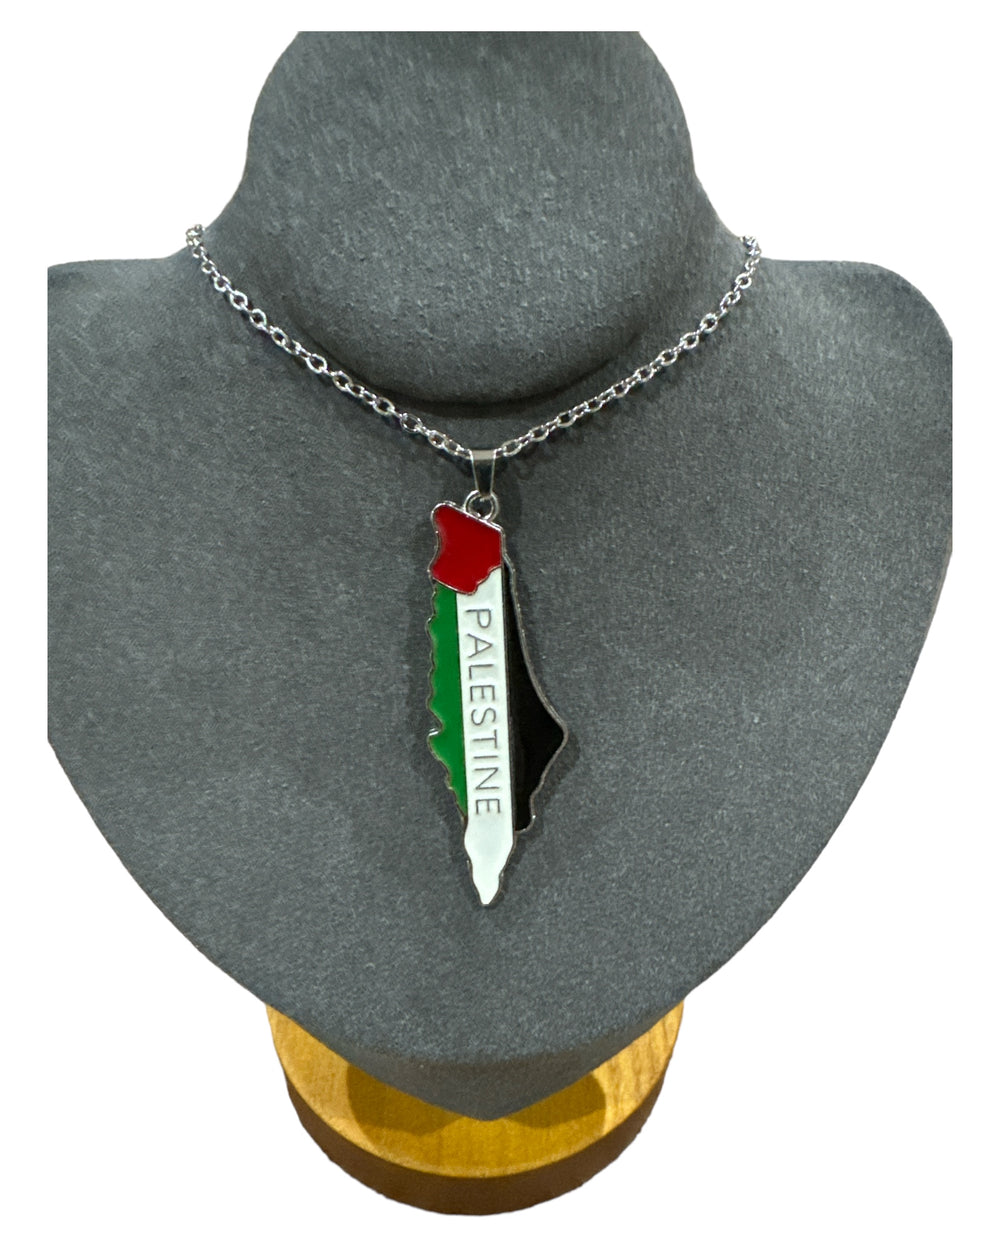 Patriotic Elegance: Stainless Steel Palestine Map Necklace with Flag Colors & English Inscription